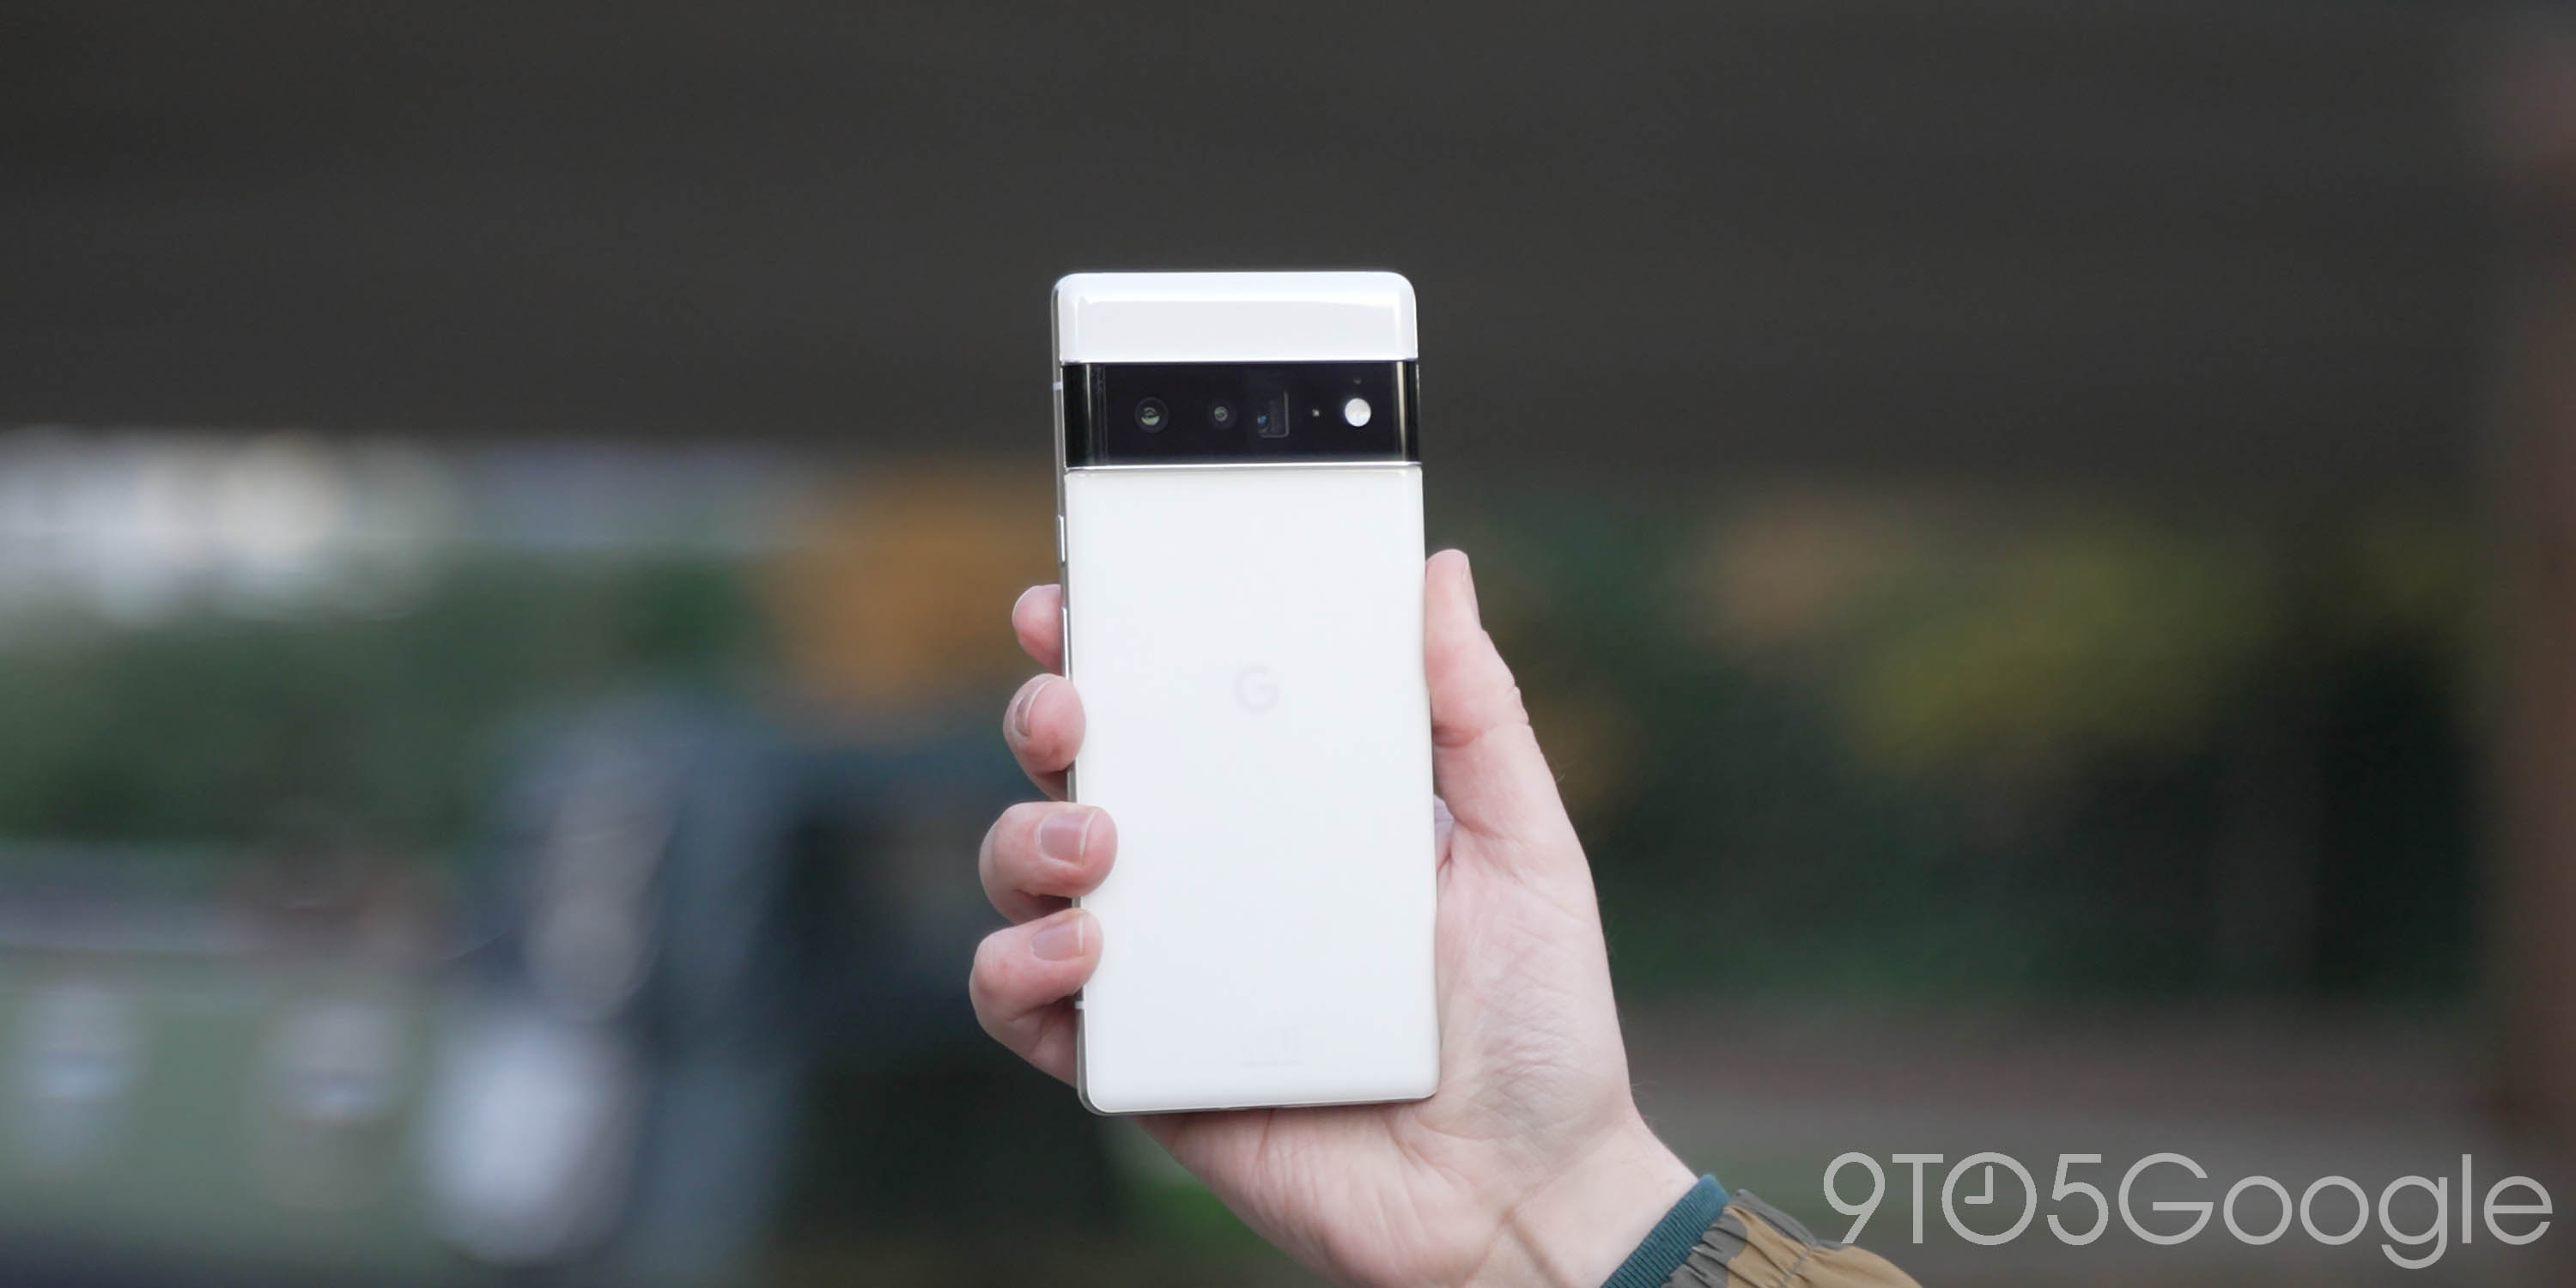 Poll: Which color Pixel 6/6 Pro did you choose?